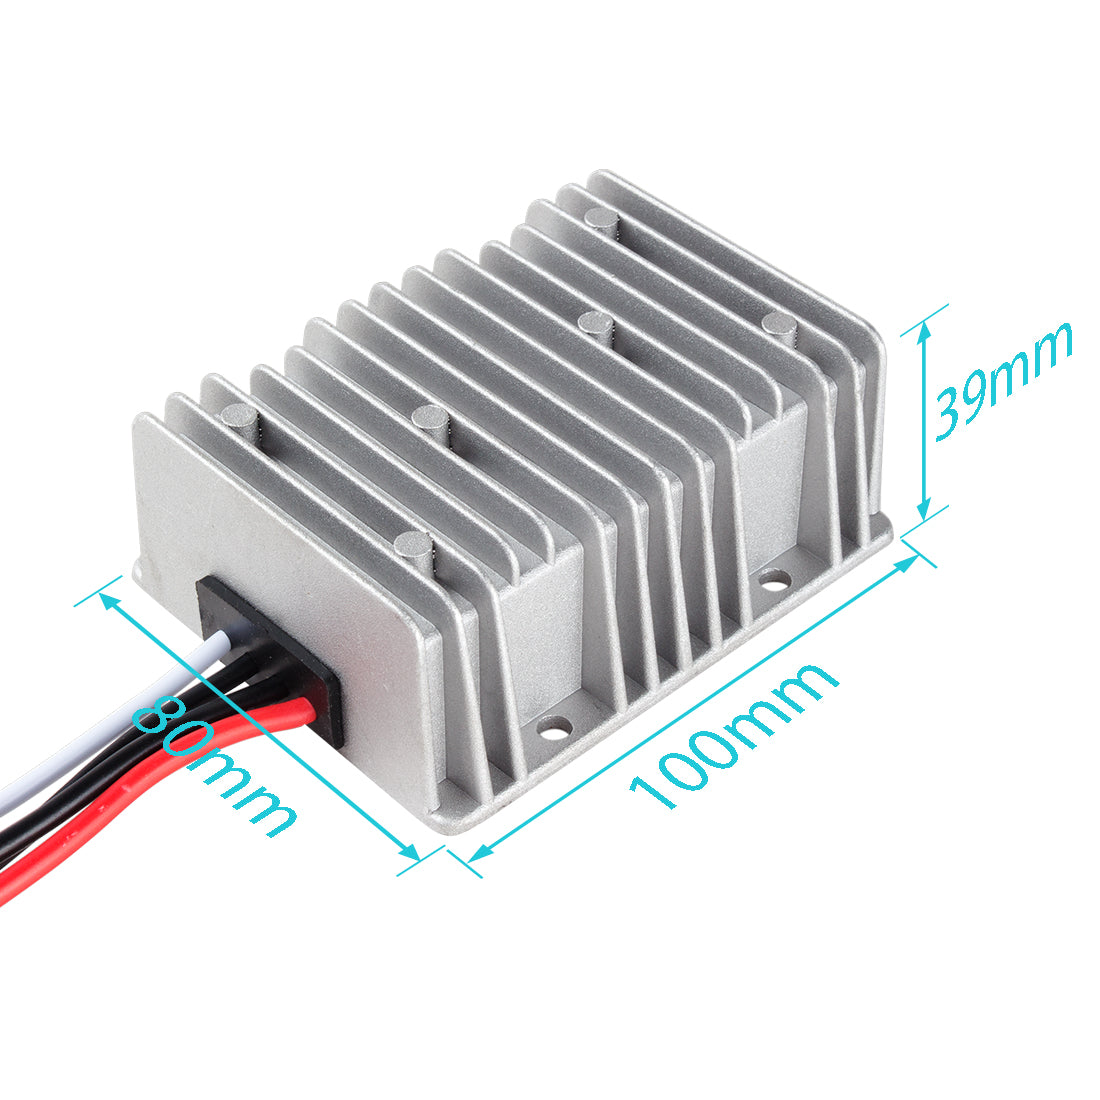 uxcell uxcell Voltage Converter Regulator DC/DC DC 12V Step-Up to DC 19V 20A 380W Power Boost Transformer Waterproof